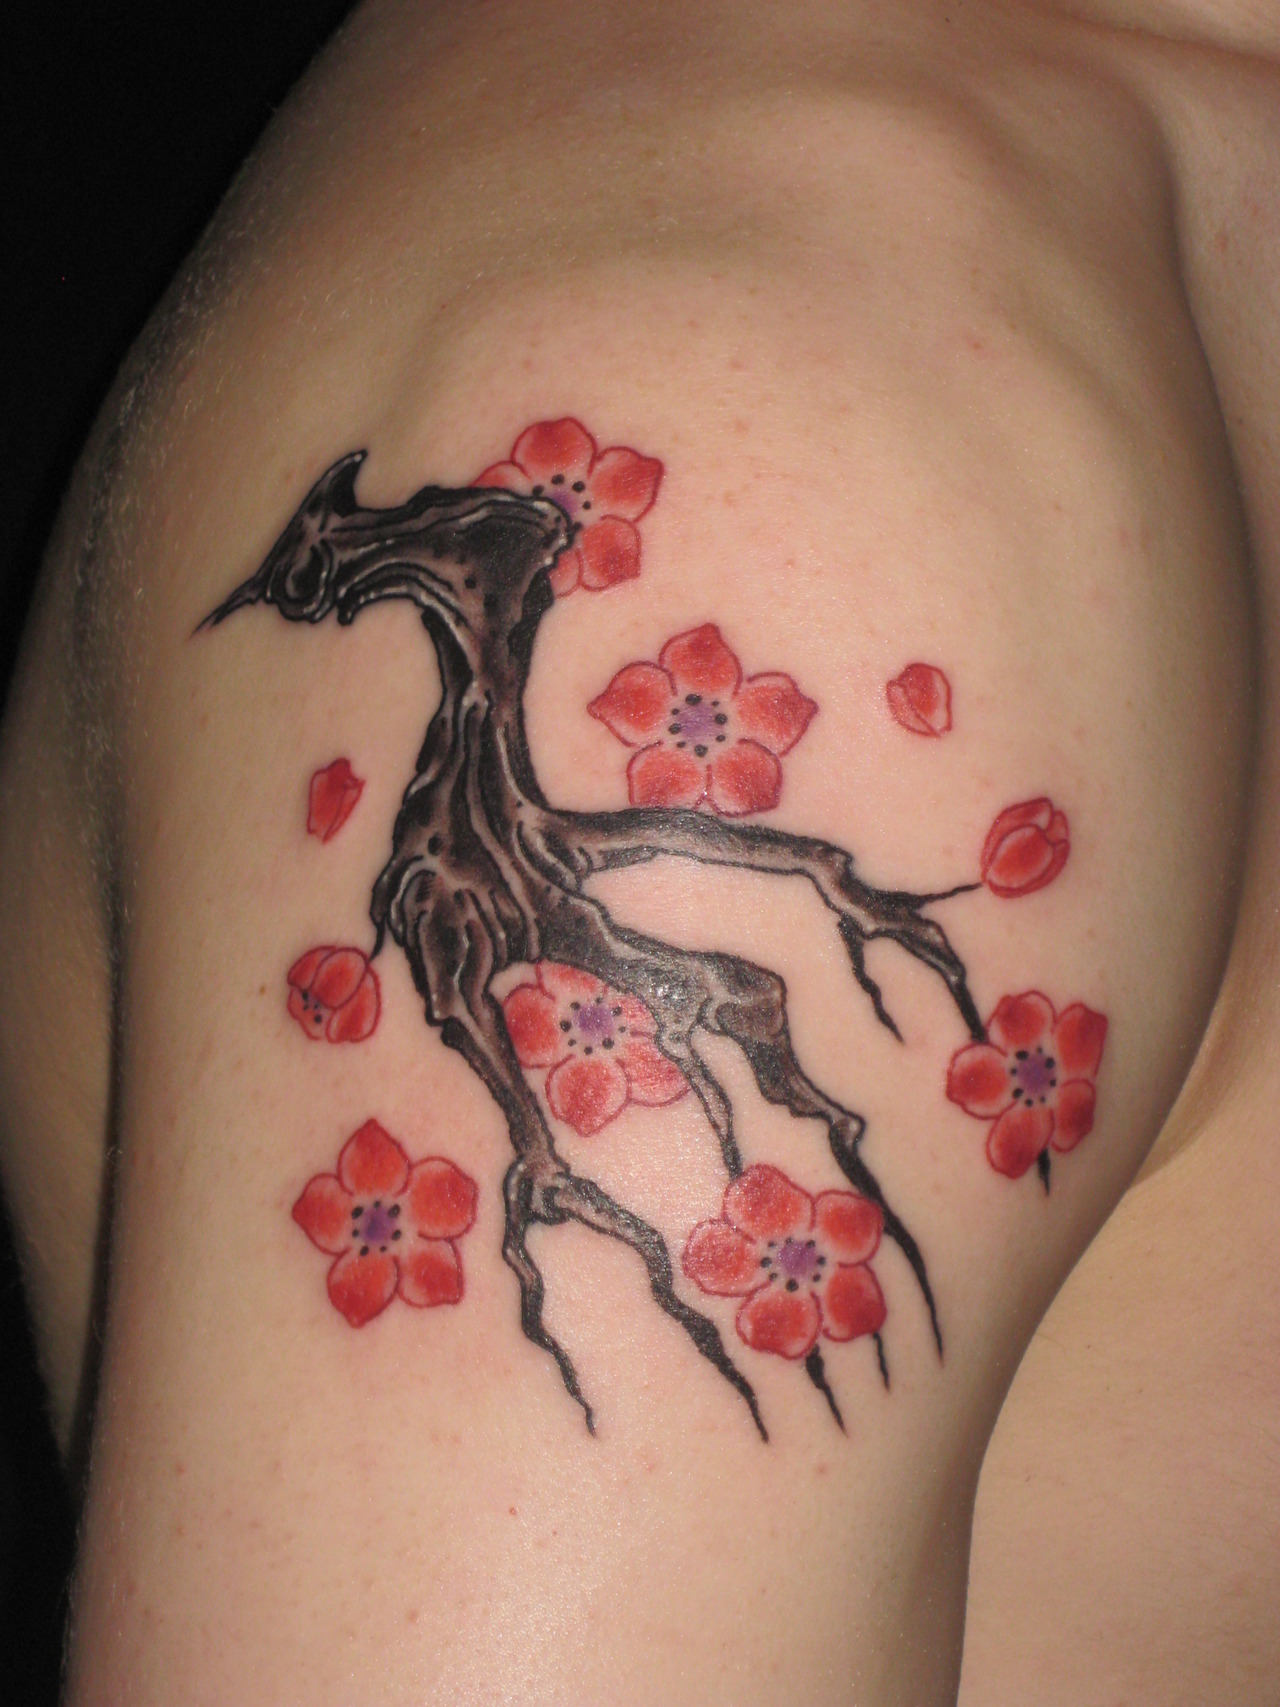 Cherry Blossom Tattoos Designs, Ideas and Meaning | Tattoos For You